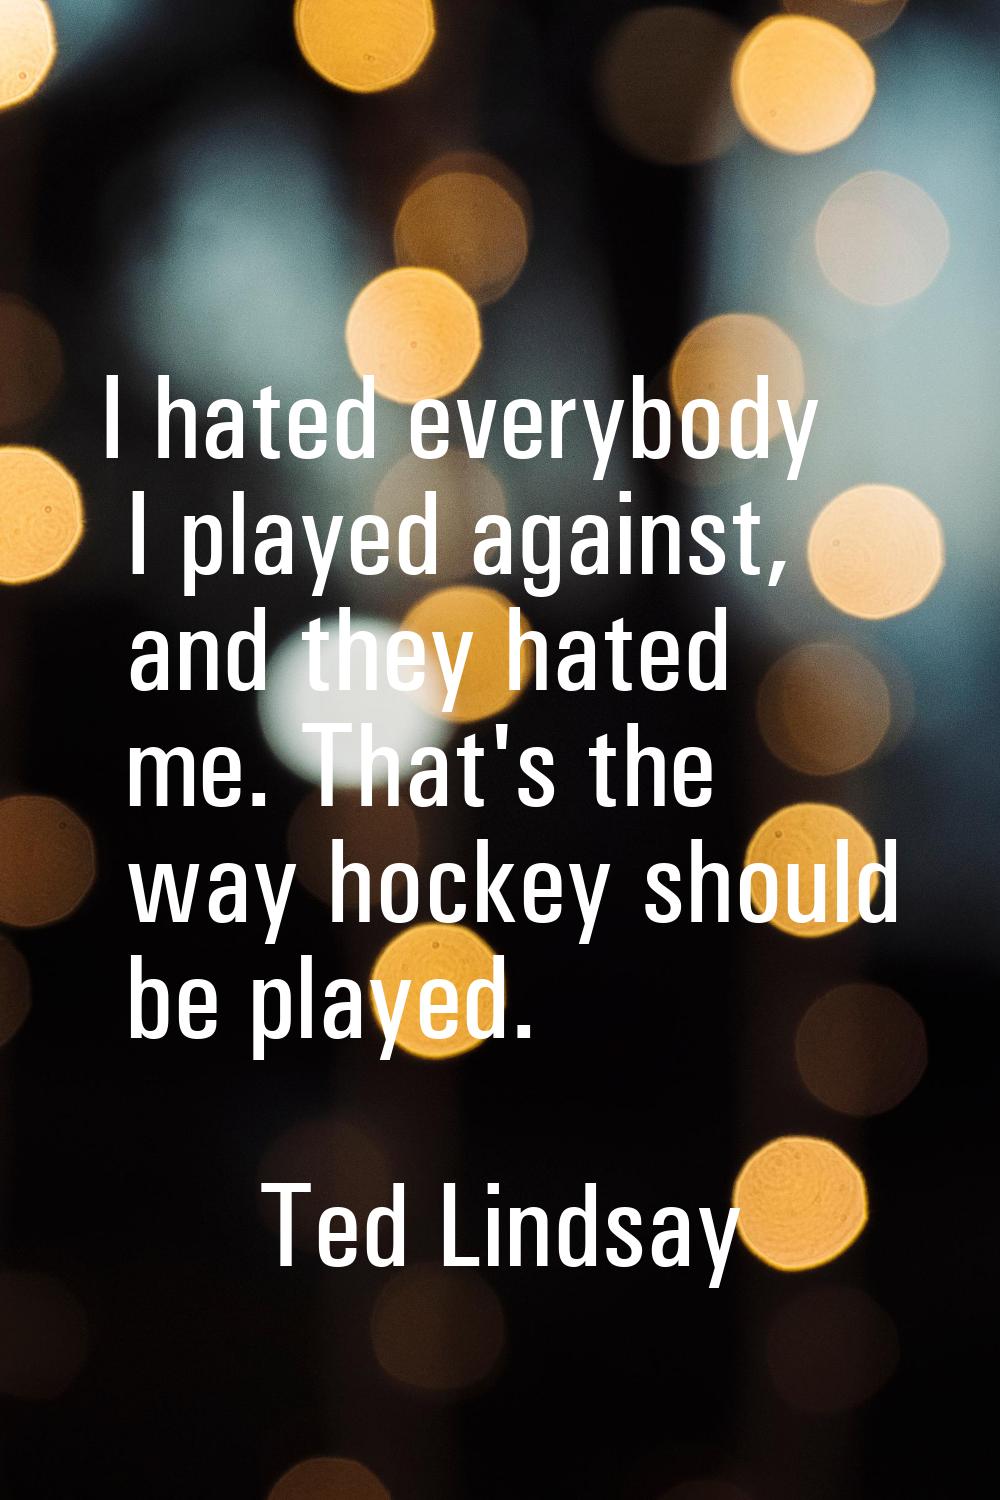 I hated everybody I played against, and they hated me. That's the way hockey should be played.